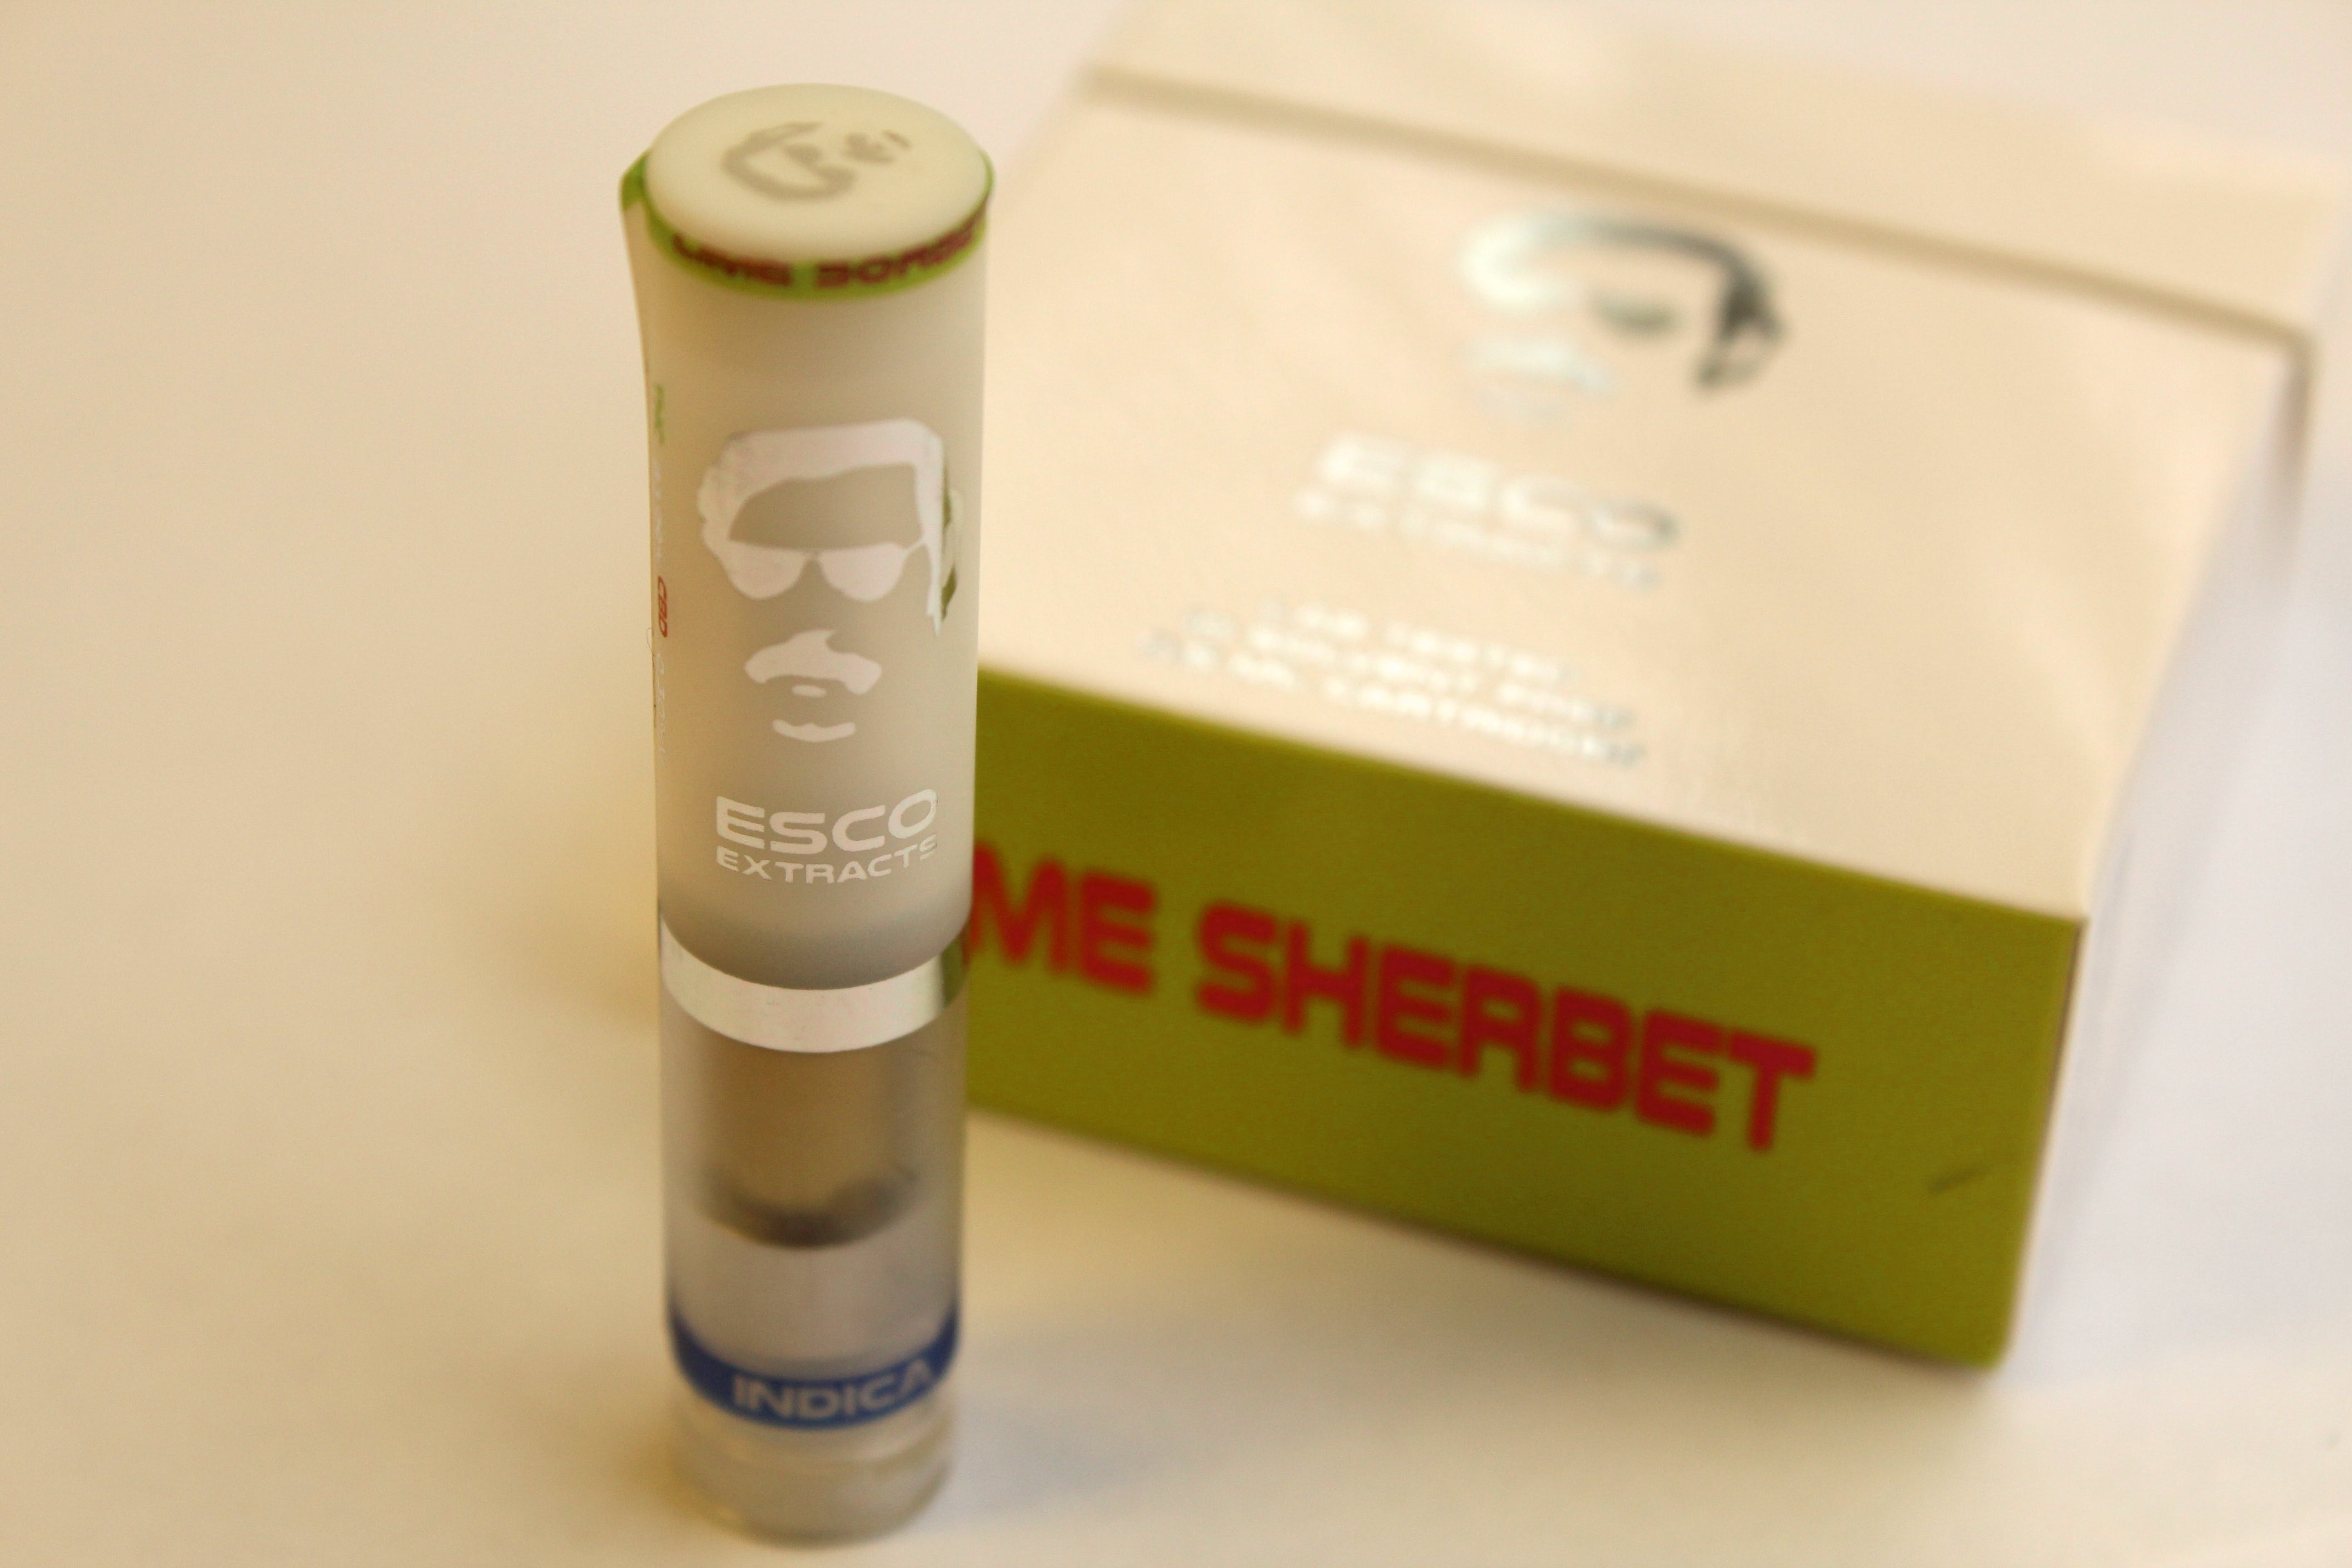 concentrate-lime-sherbet-esco-extracts-distillate-cartridge-5ml